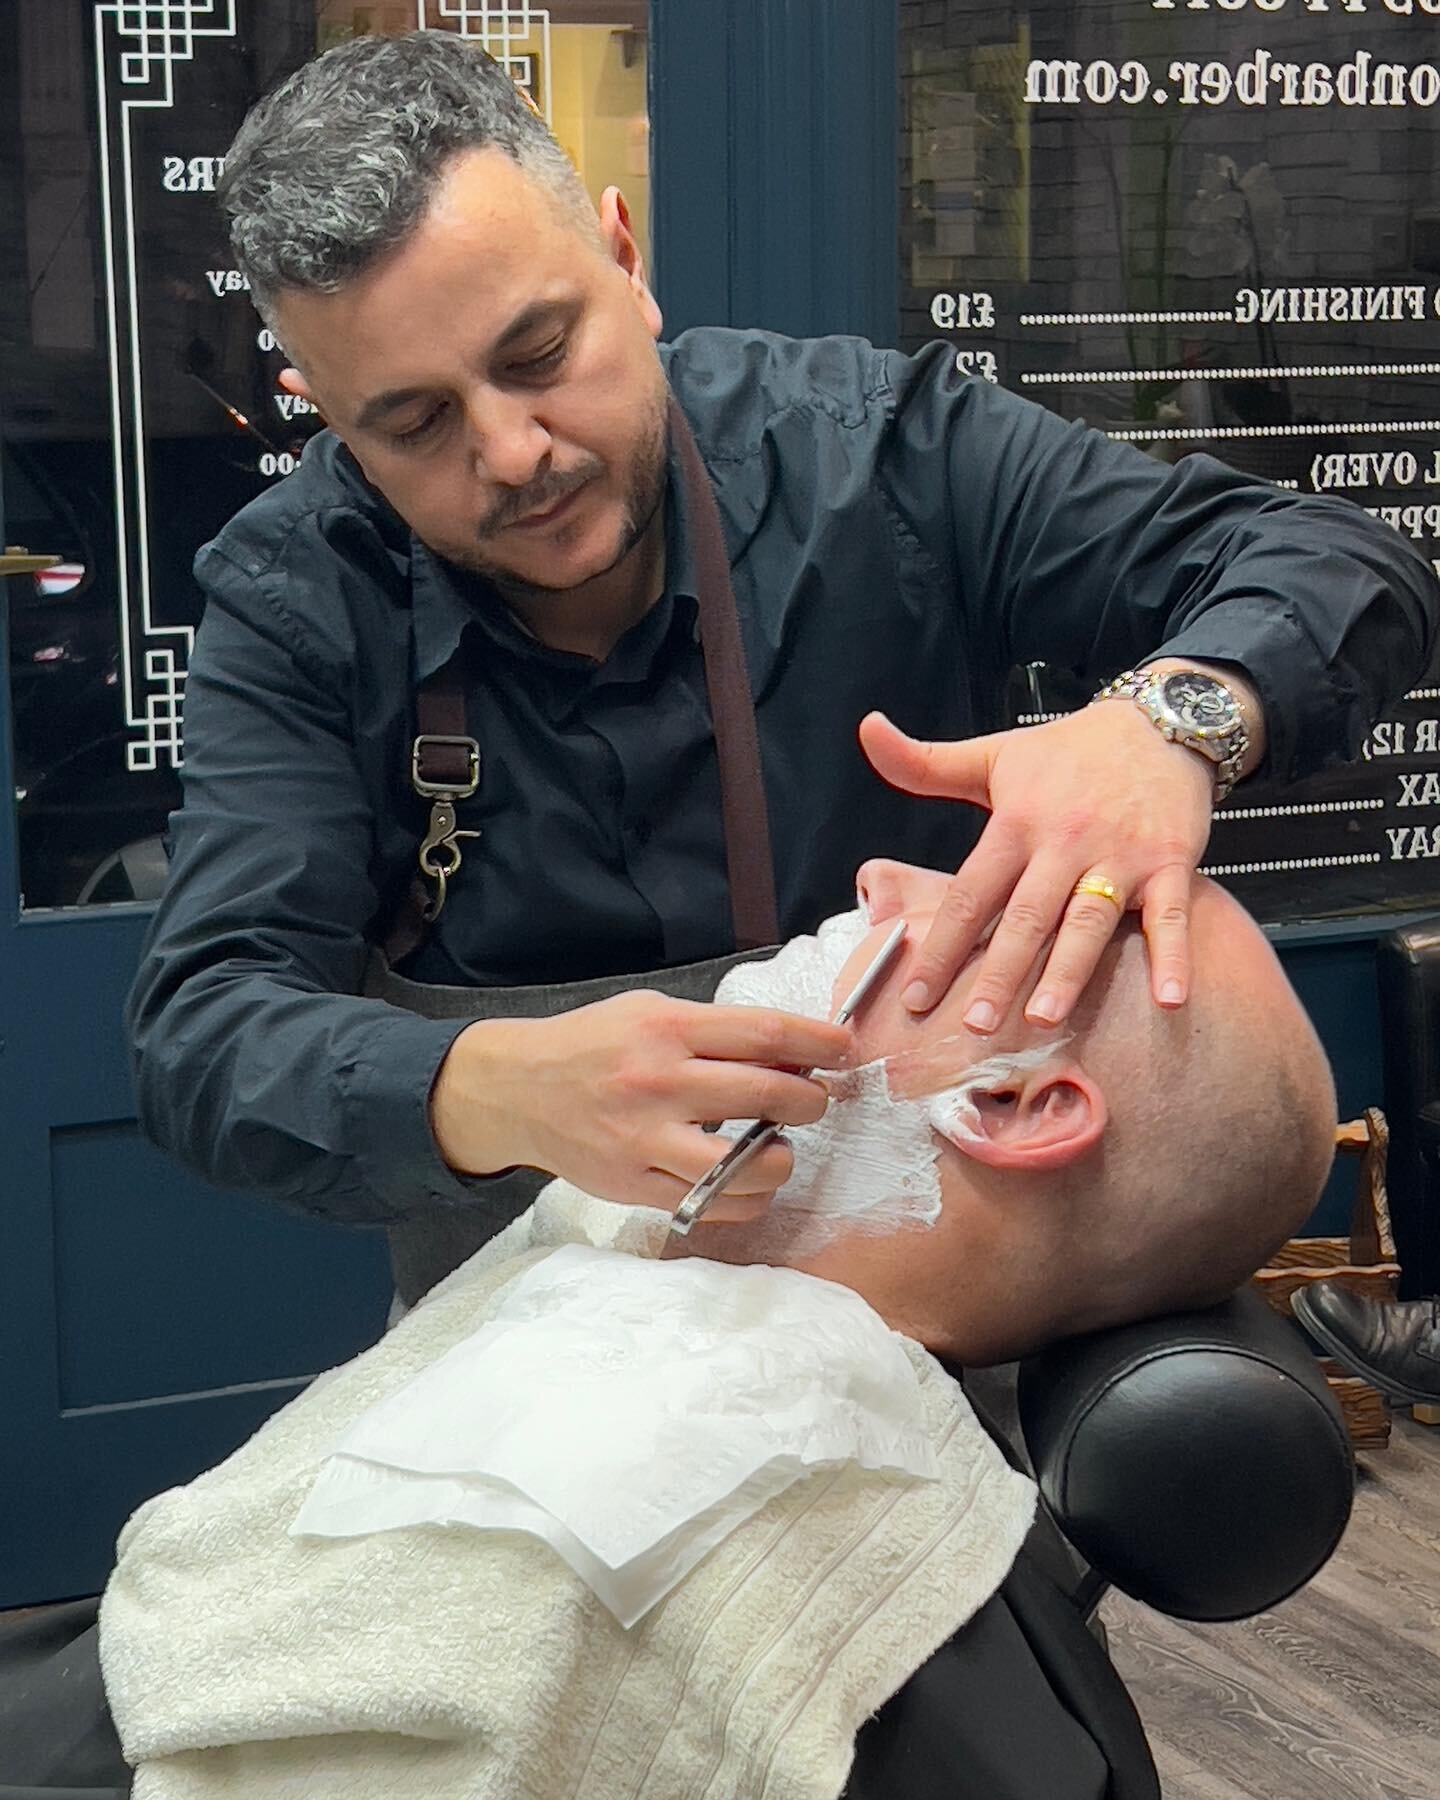 #Wimbledon barbers# hot towel shave #hairstyle #wash and cut #